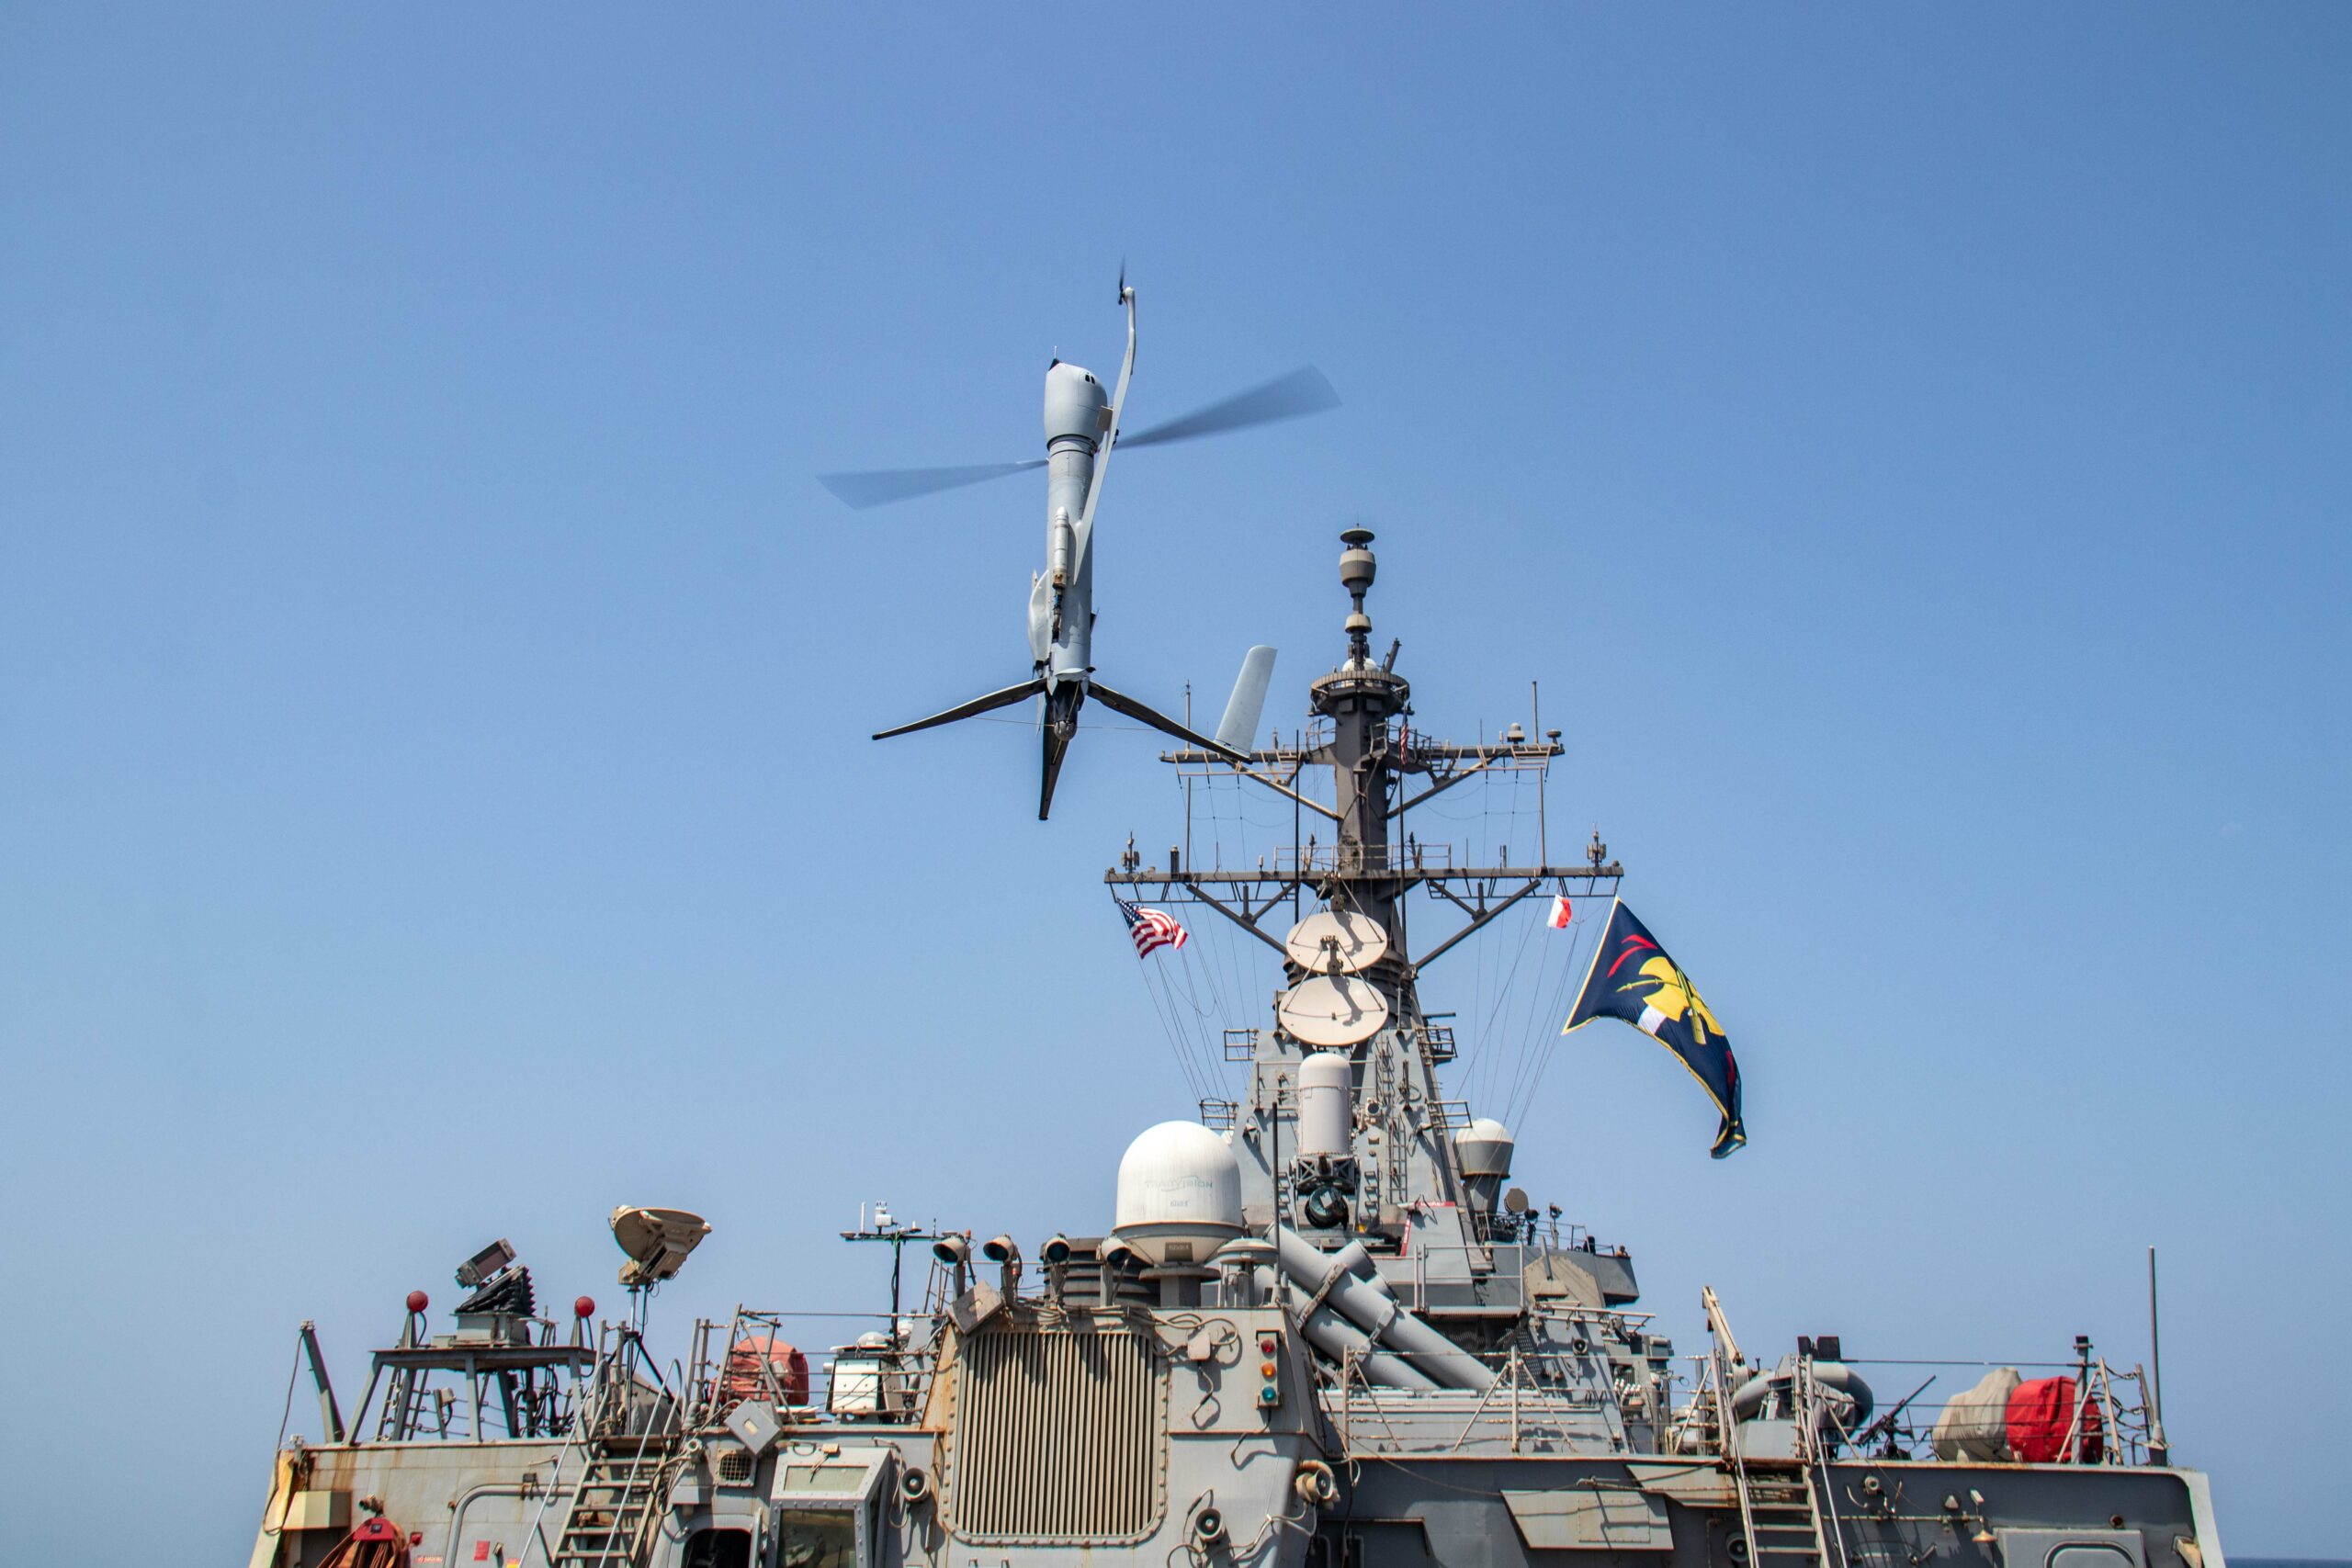 231006-N-HY958-1037 GULF OF OMAN (Oct. 6, 2023) An Aerovel Flexrotor unmanned aerial vehicle launches from the deck of the Arleigh Burke-class guided-missile destroyer USS McFaul (DDG 74) in the Gulf of Oman, in an image released Oct. 6. U.S. 5th Fleet forces recently conducted an operation integrating unmanned platforms with traditionally crewed ships and aircraft to conduct enhanced maritime security operations in the waters surrounding the Arabian Peninsula. Seven task forces falling under U.S. 5th Fleet integrated 12 different unmanned platforms with manned ships for “manned-unmanned teaming” operations tracking Iranian Navy and Islamic Revolutionary Guard Corps Navy (IRGCN) ships and small boats over several days during routine patrols in and around the Strait of Hormuz. (U.S. Navy photo)